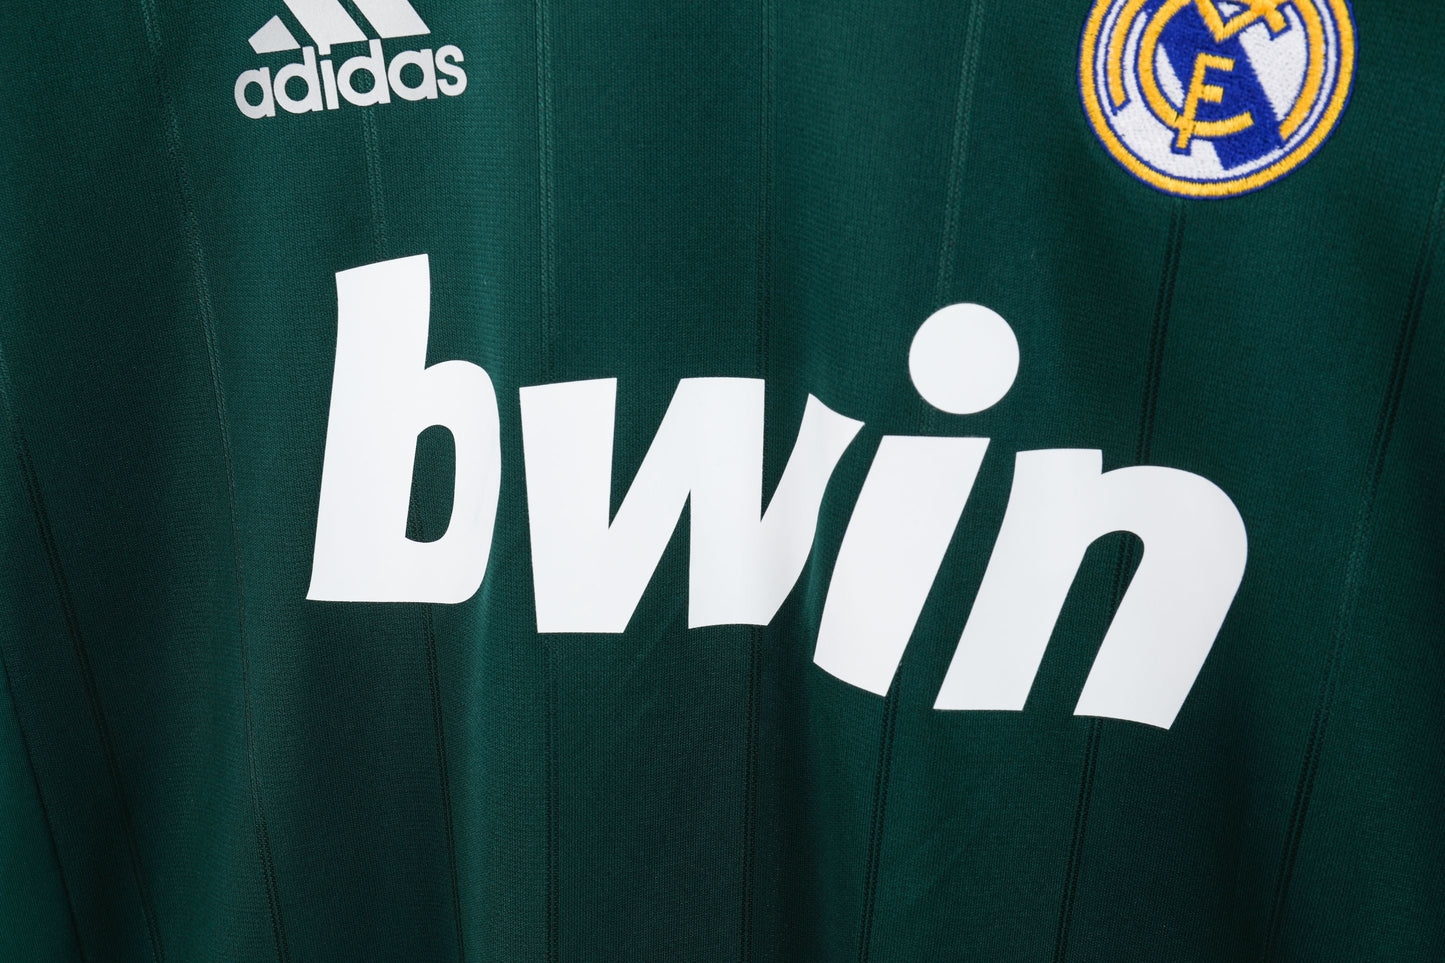 2012/13 season Real Madrid long-sleeved second guest